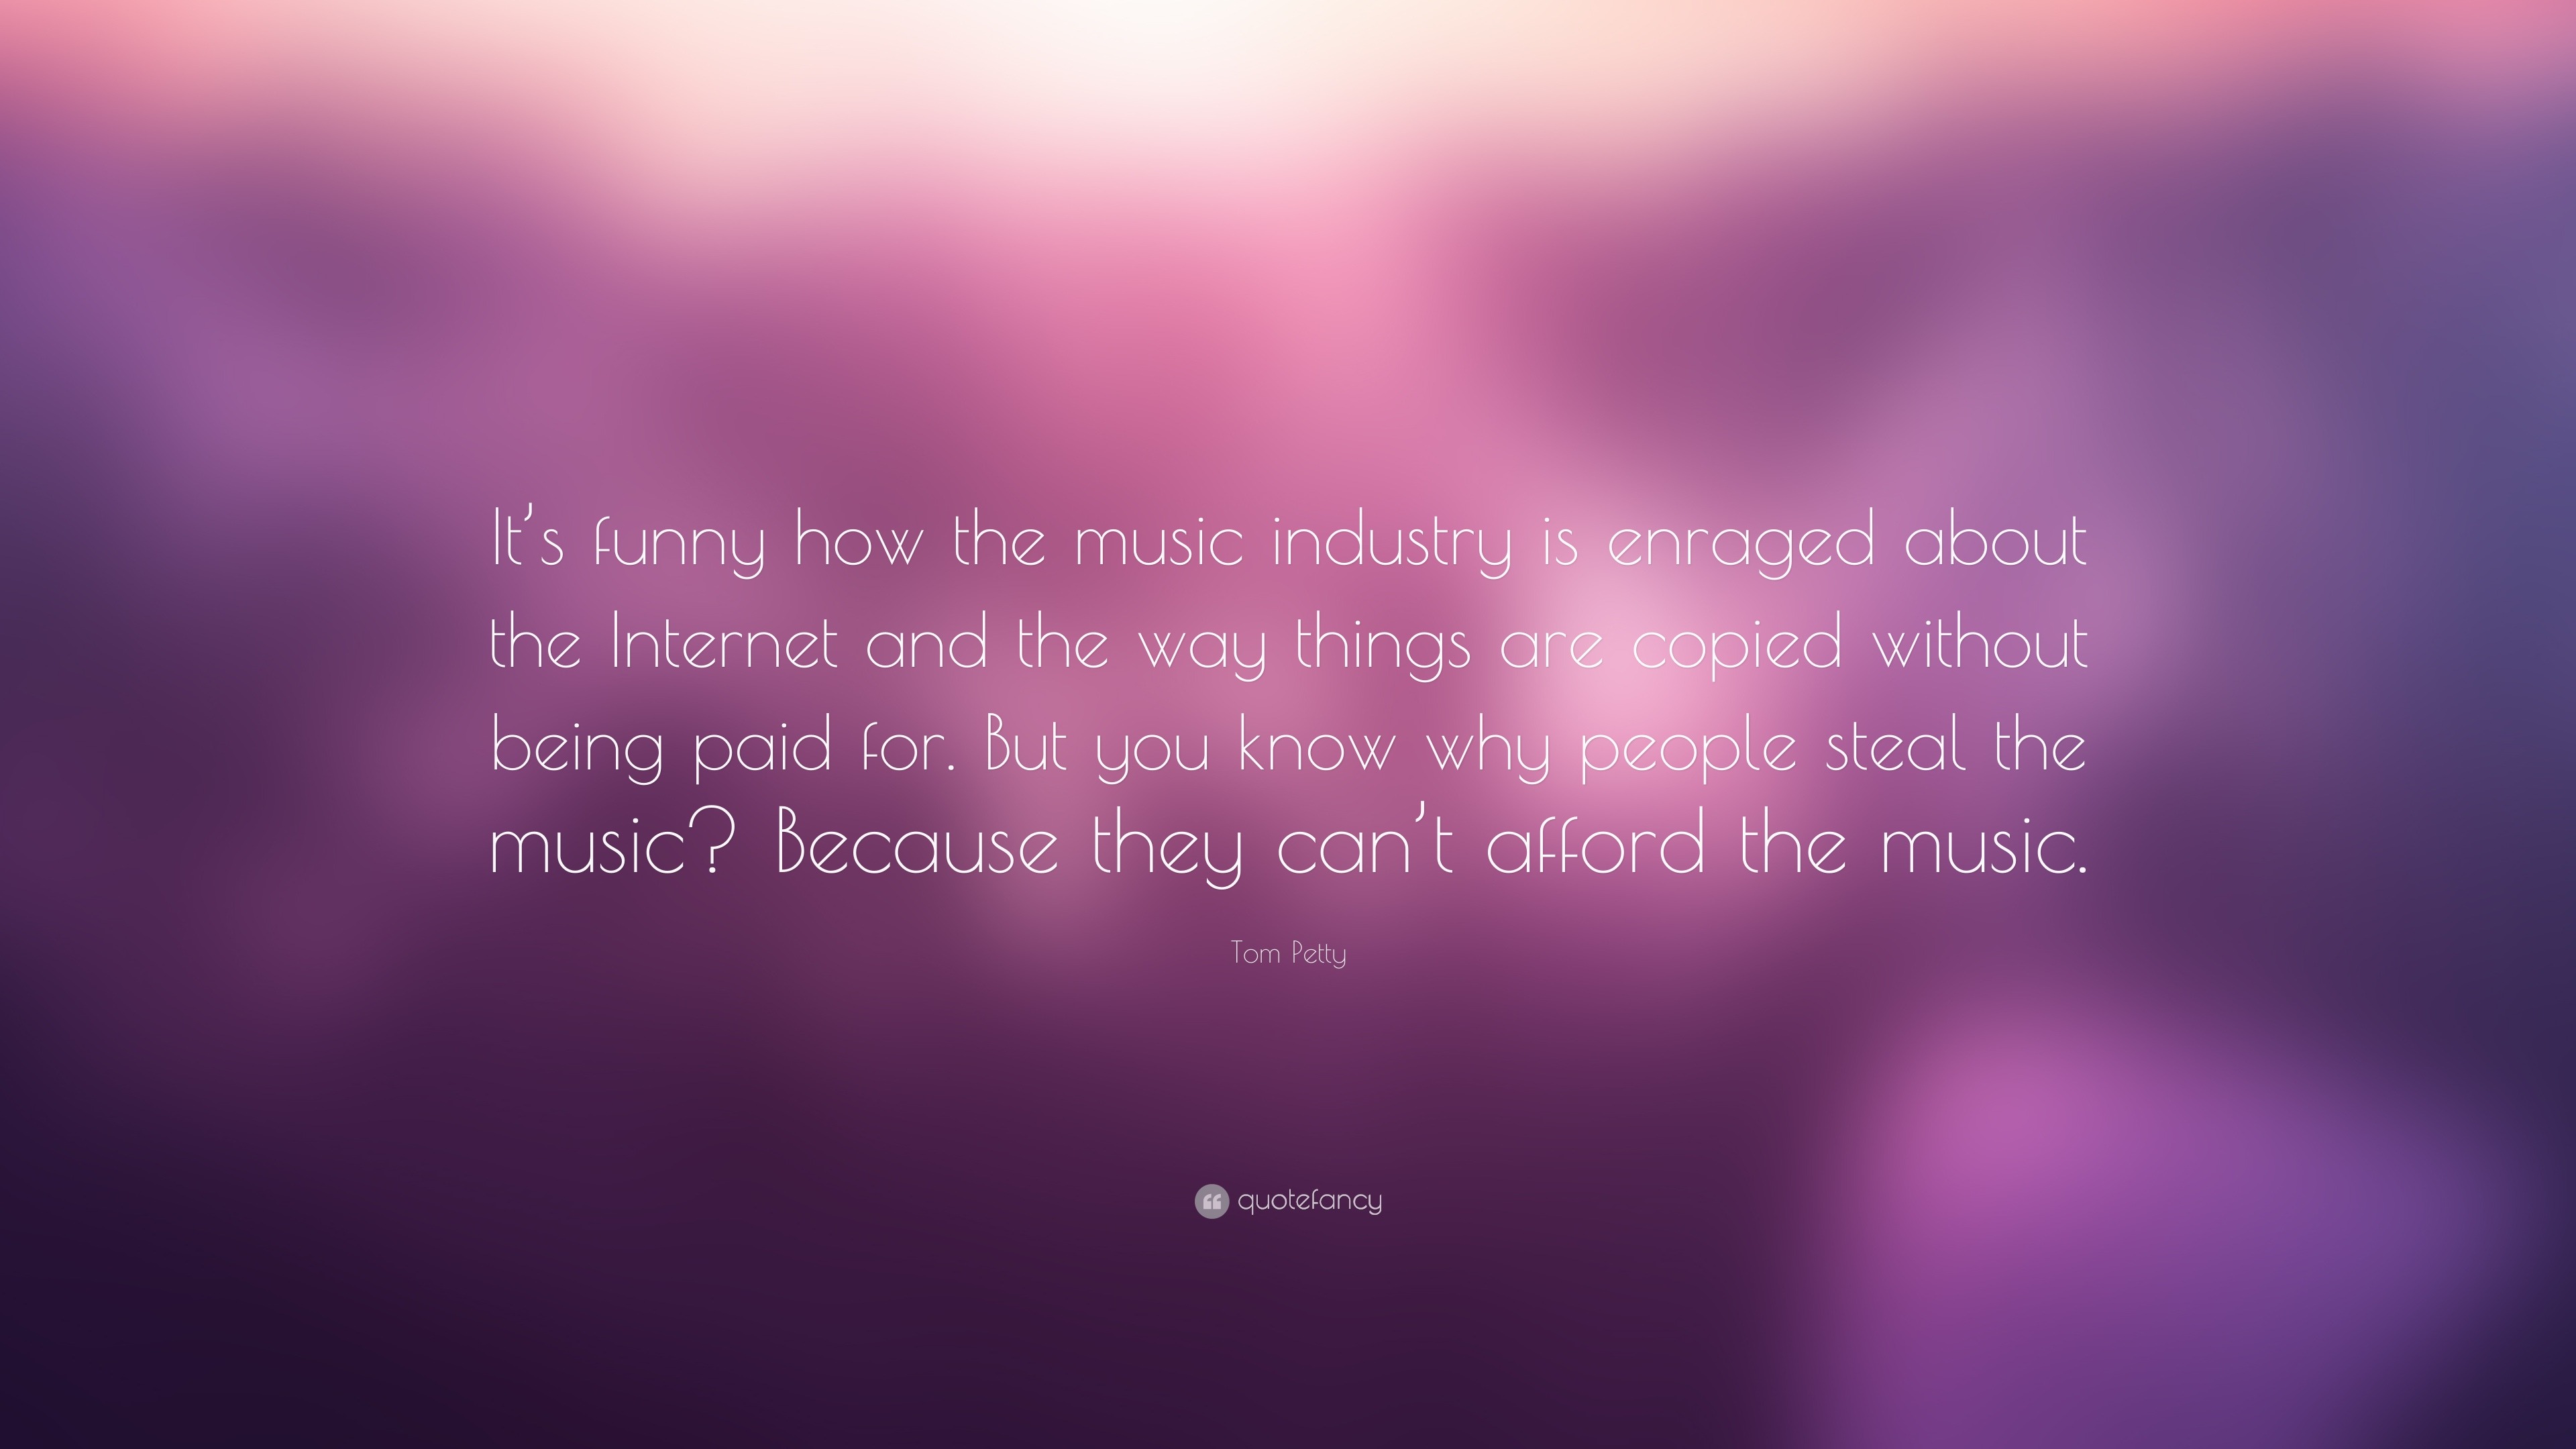 Tom Petty Quote: “It's funny how the music industry is enraged about the  Internet and the way things are copied without being paid for. Bu...”